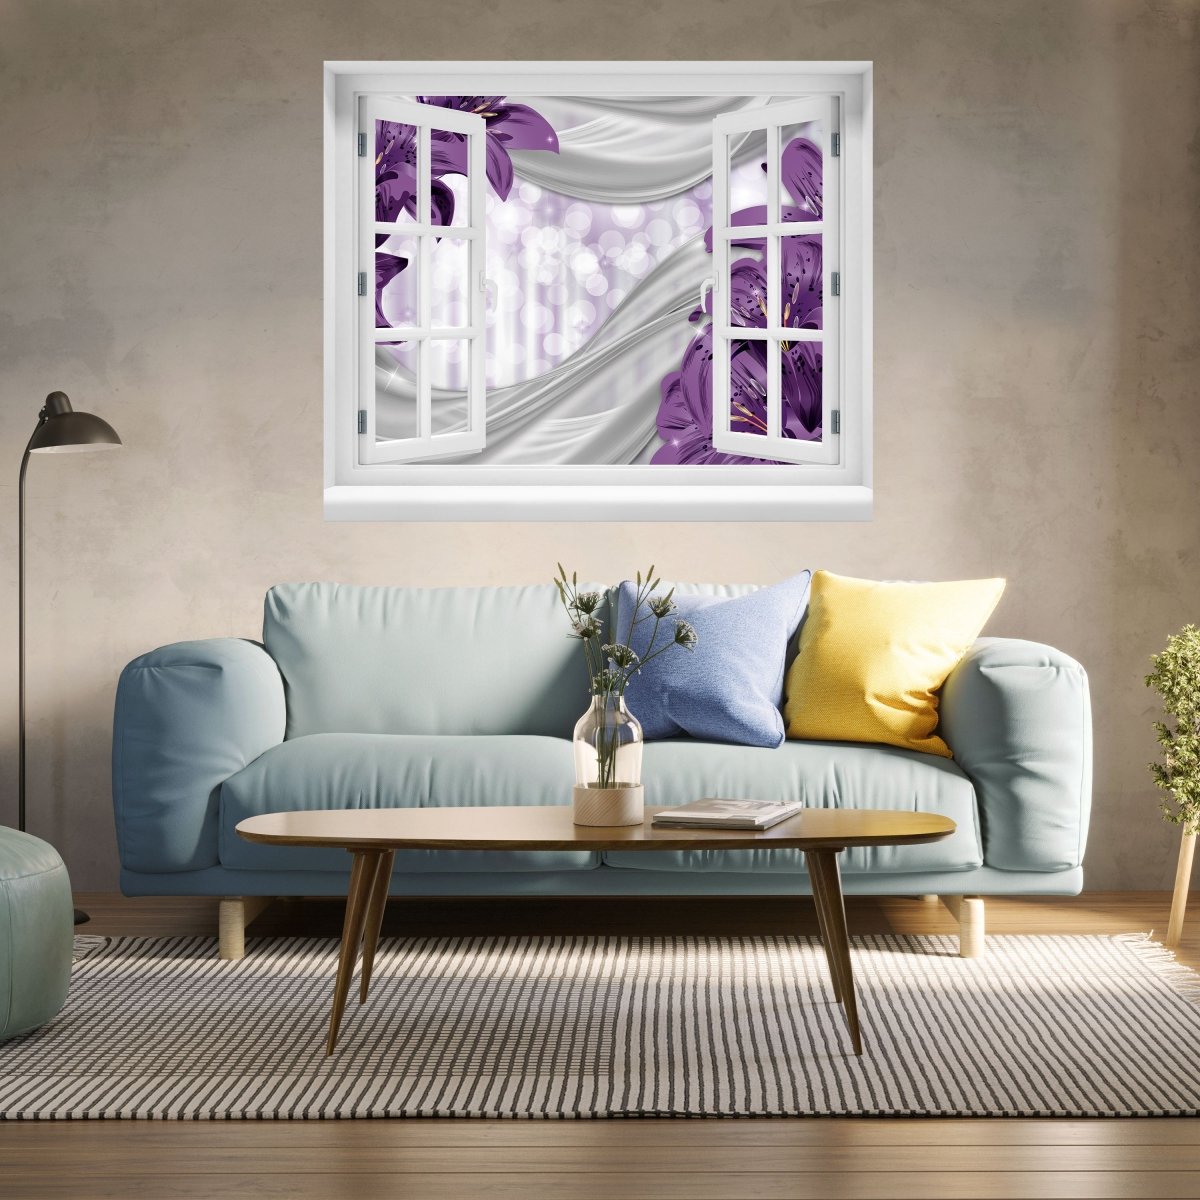 3D wall sticker lily purple abstract - Wall Decal M0526